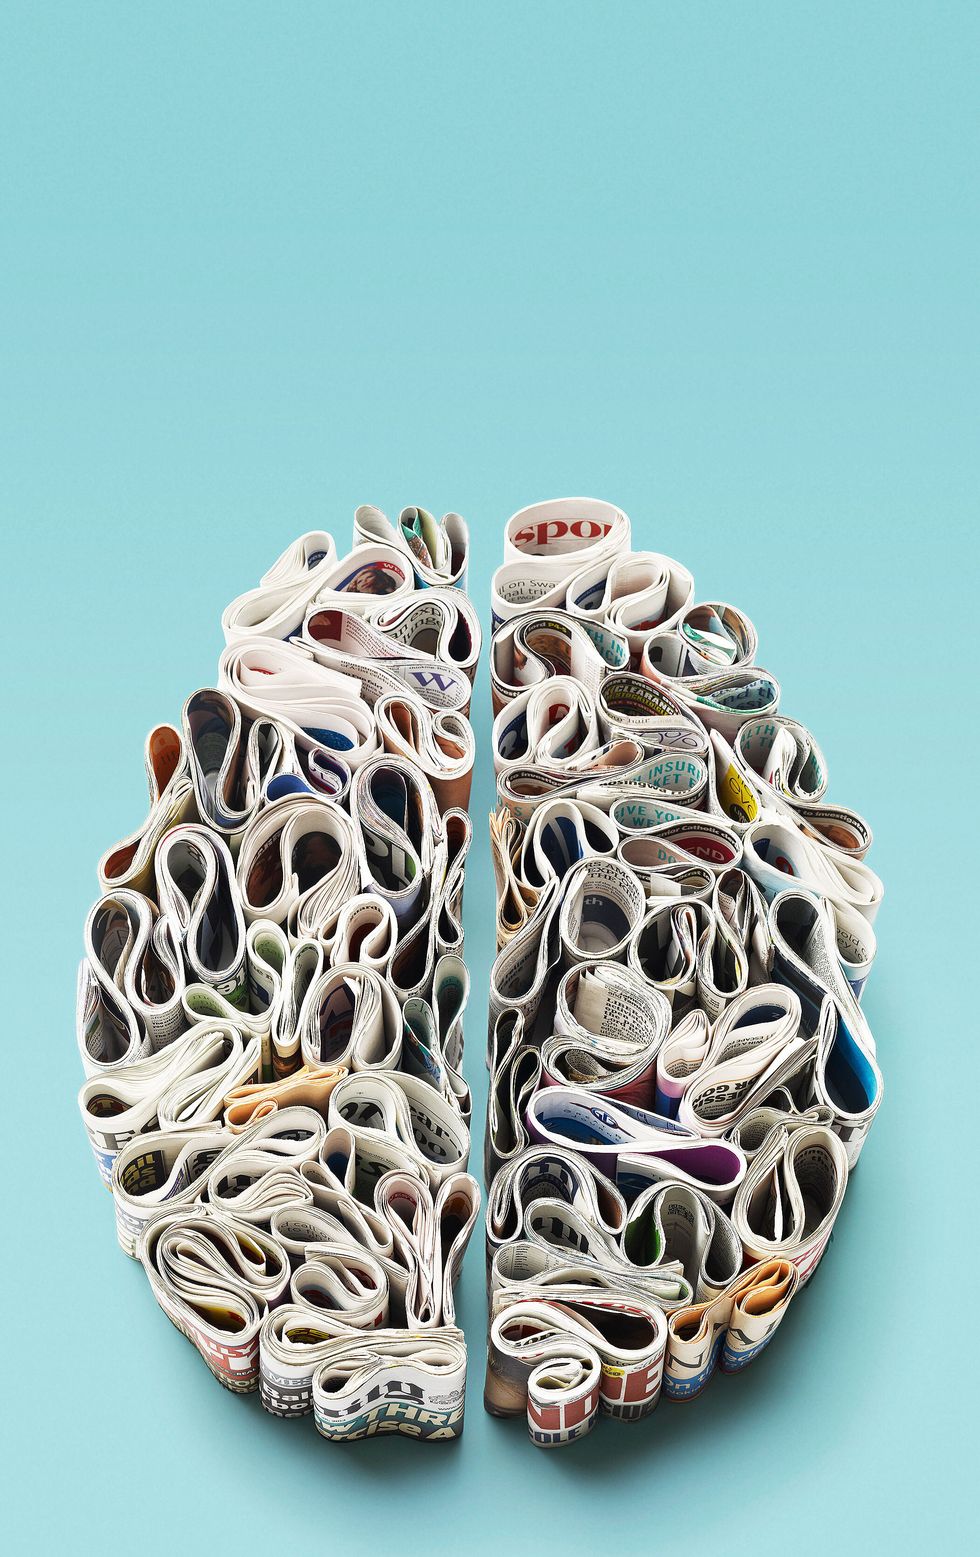 brain made out of rolled up newspapers